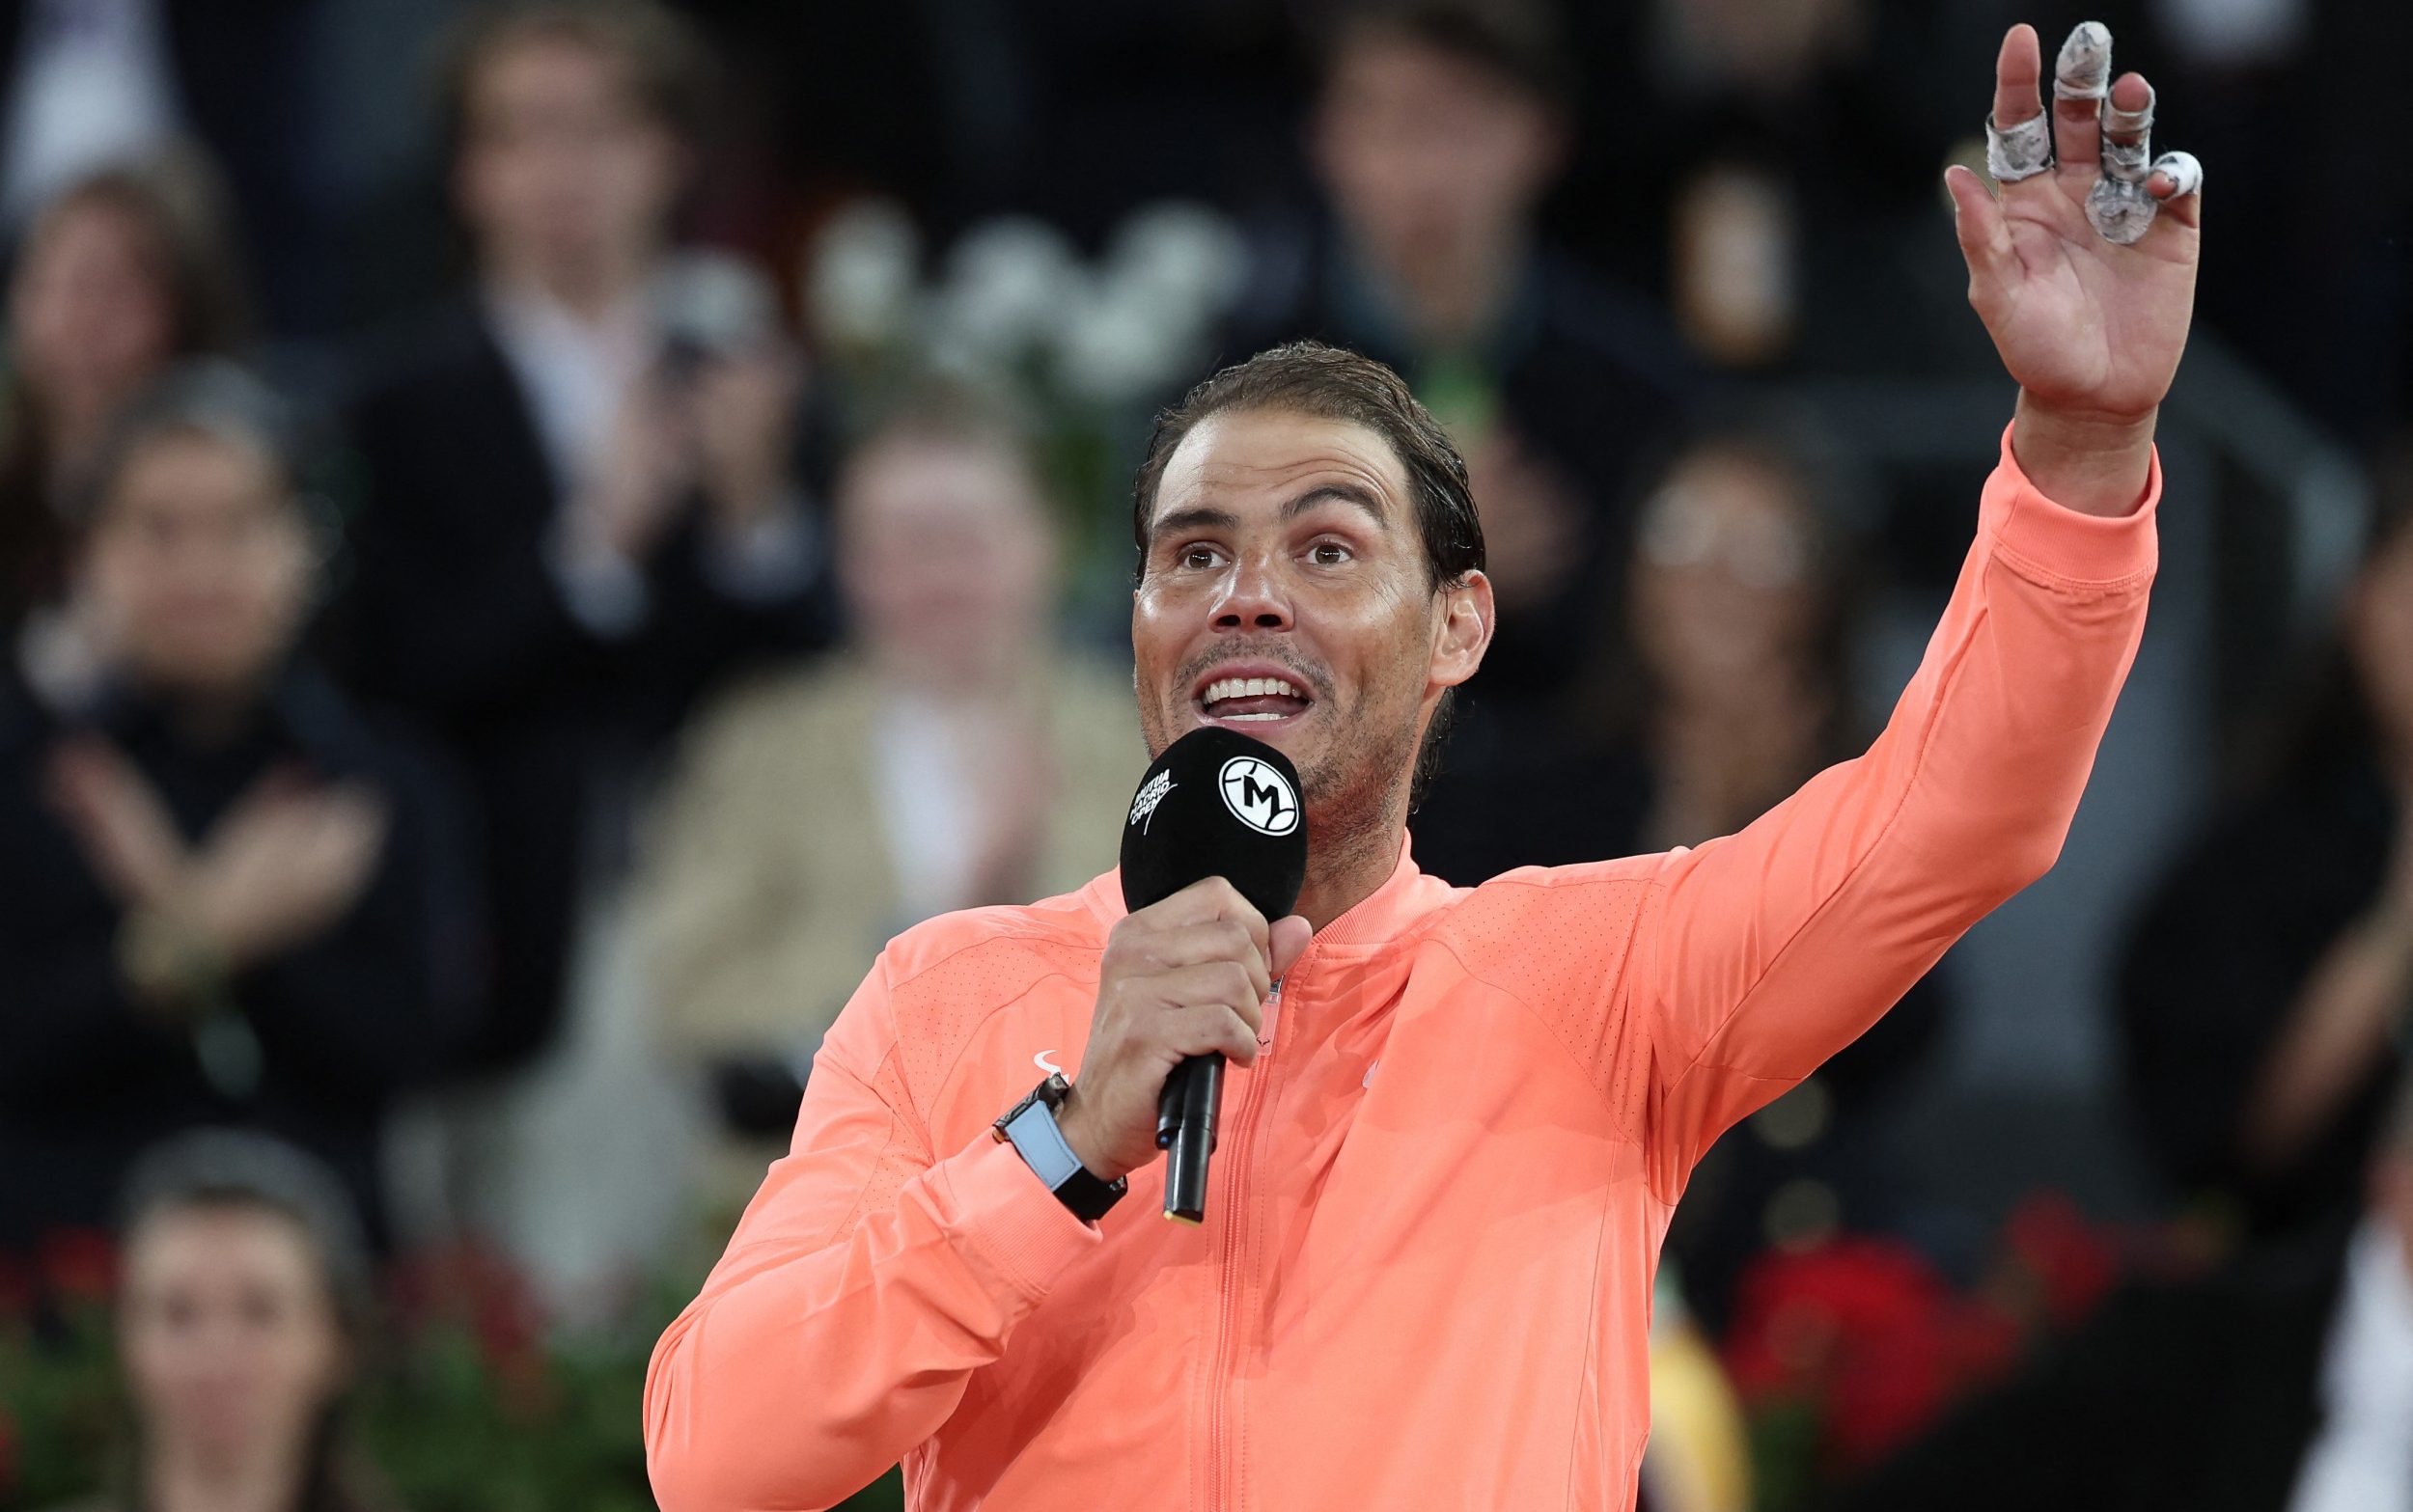 rafael nadal says emotional ‘goodbye’ to madrid open after loss